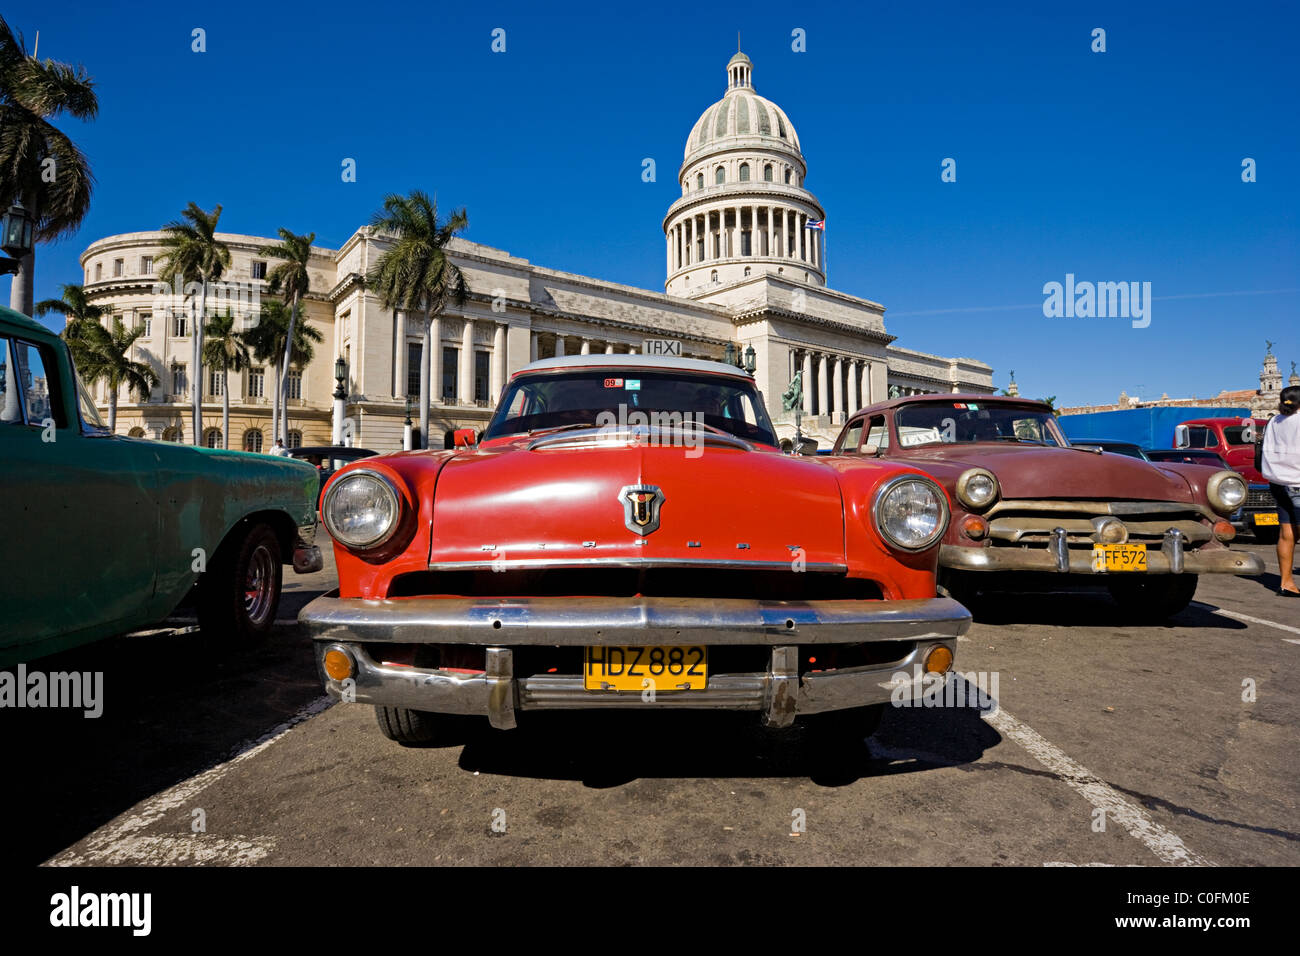 An old American 1950s Mercury automobile outside the Capitol building in Havana  Cuba Stock Photo